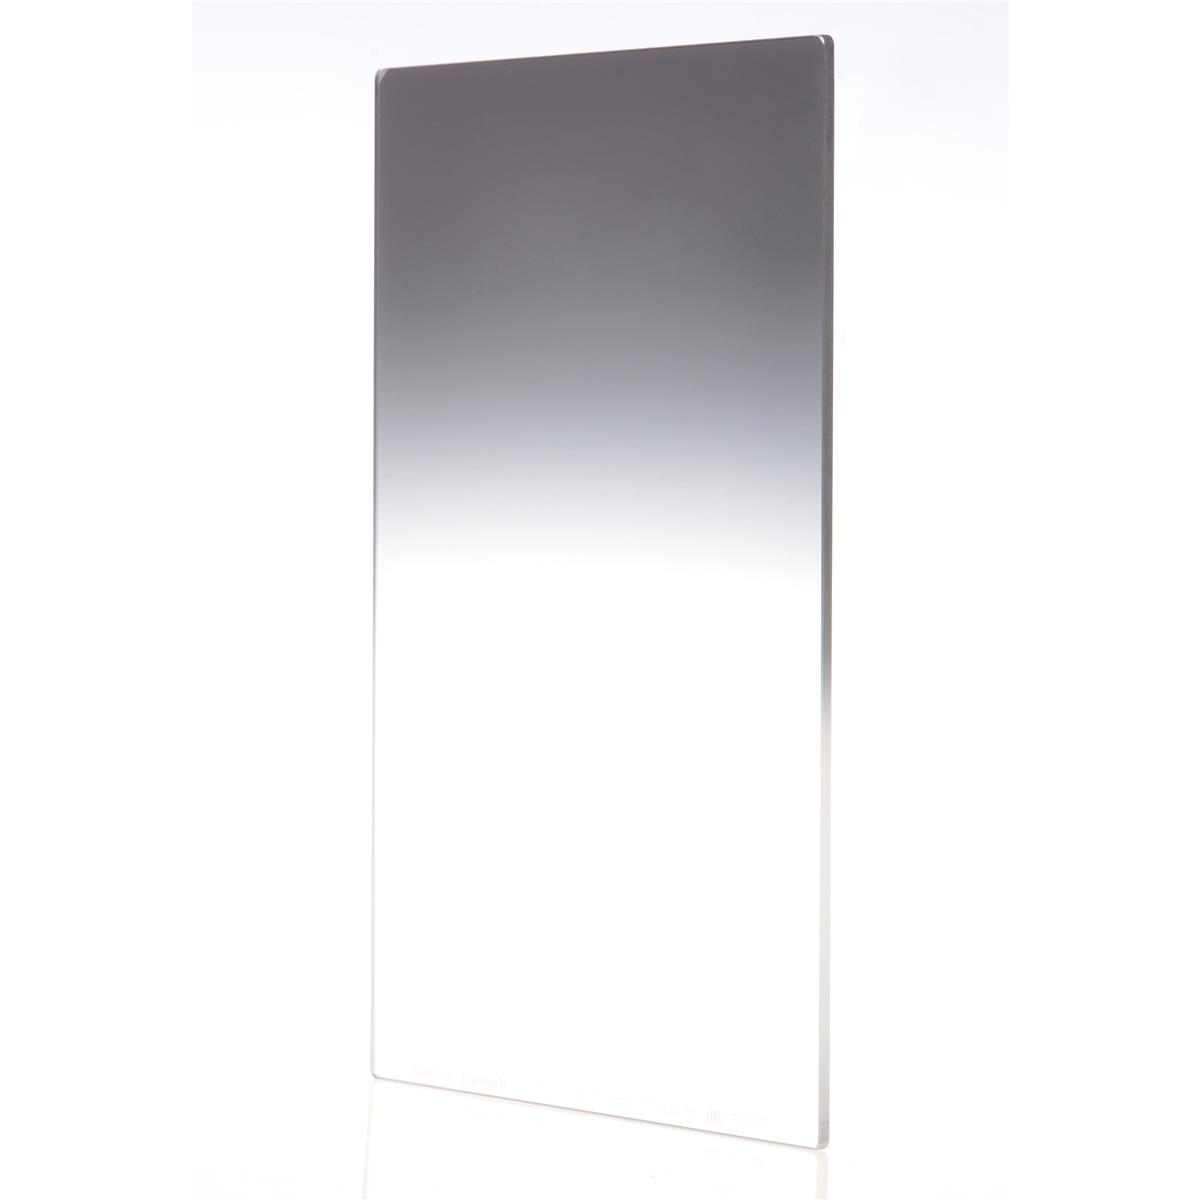 Image of Benro 100x150mm Master Hardened Glass Soft Graduated 1.2 ND Filter